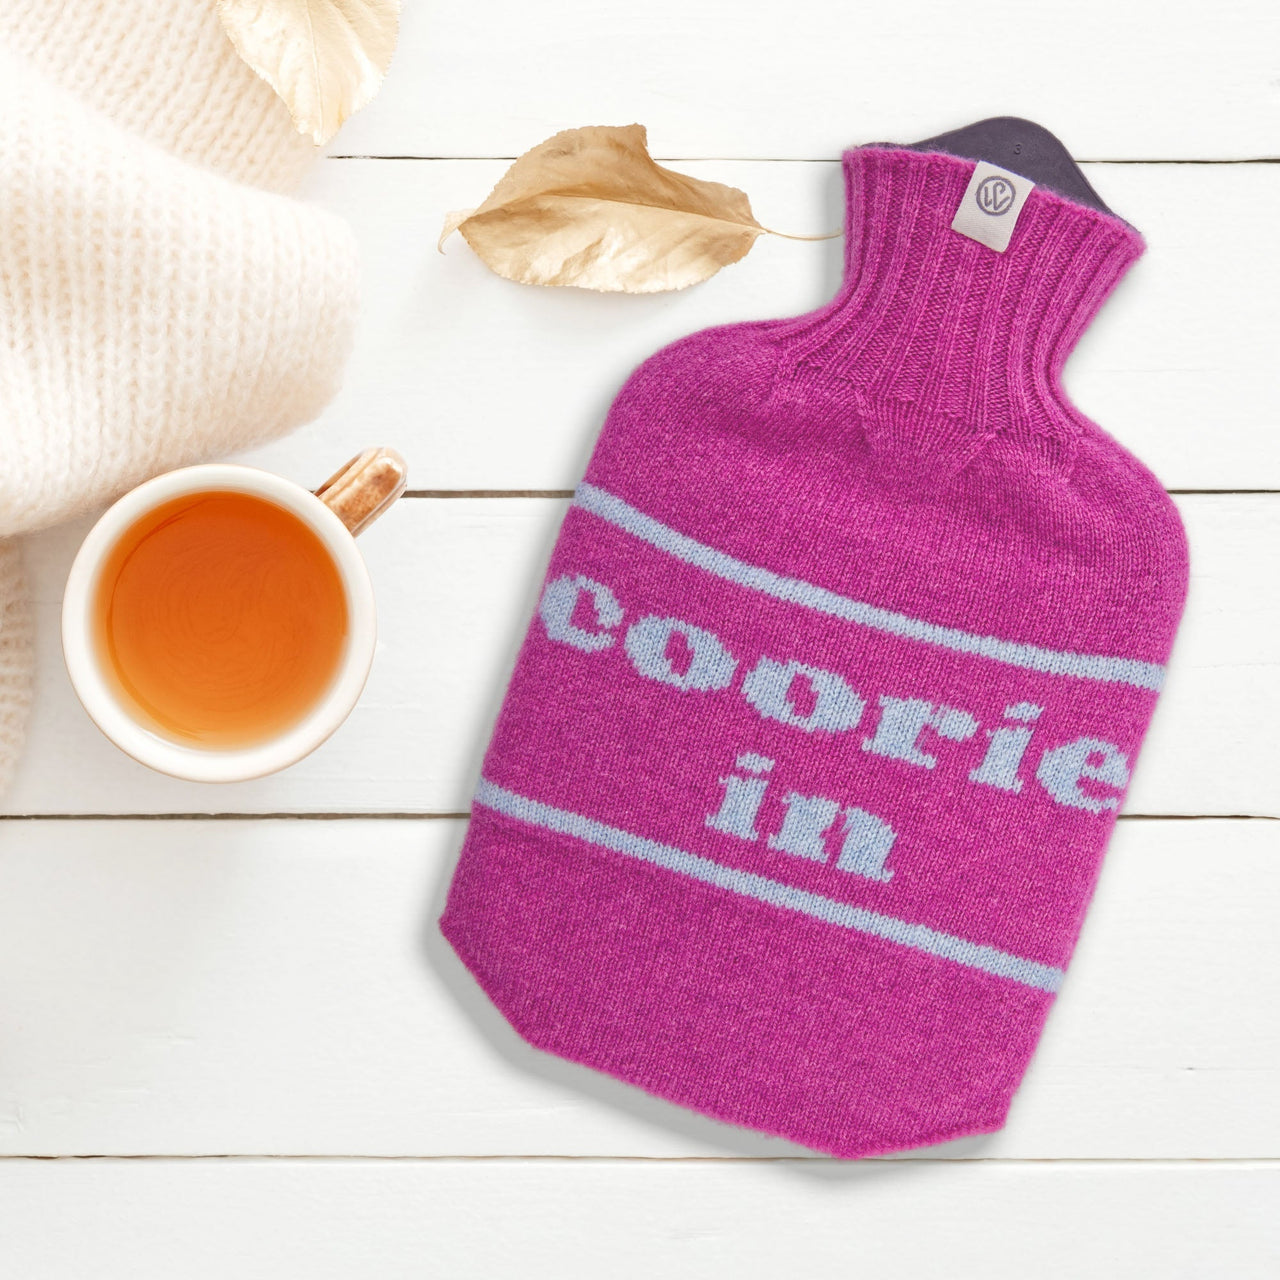 Lambswool Knit Coorie In Mini Sustainable Hot Water Bottle Bright Pink/Sky Blue - Made Scotland